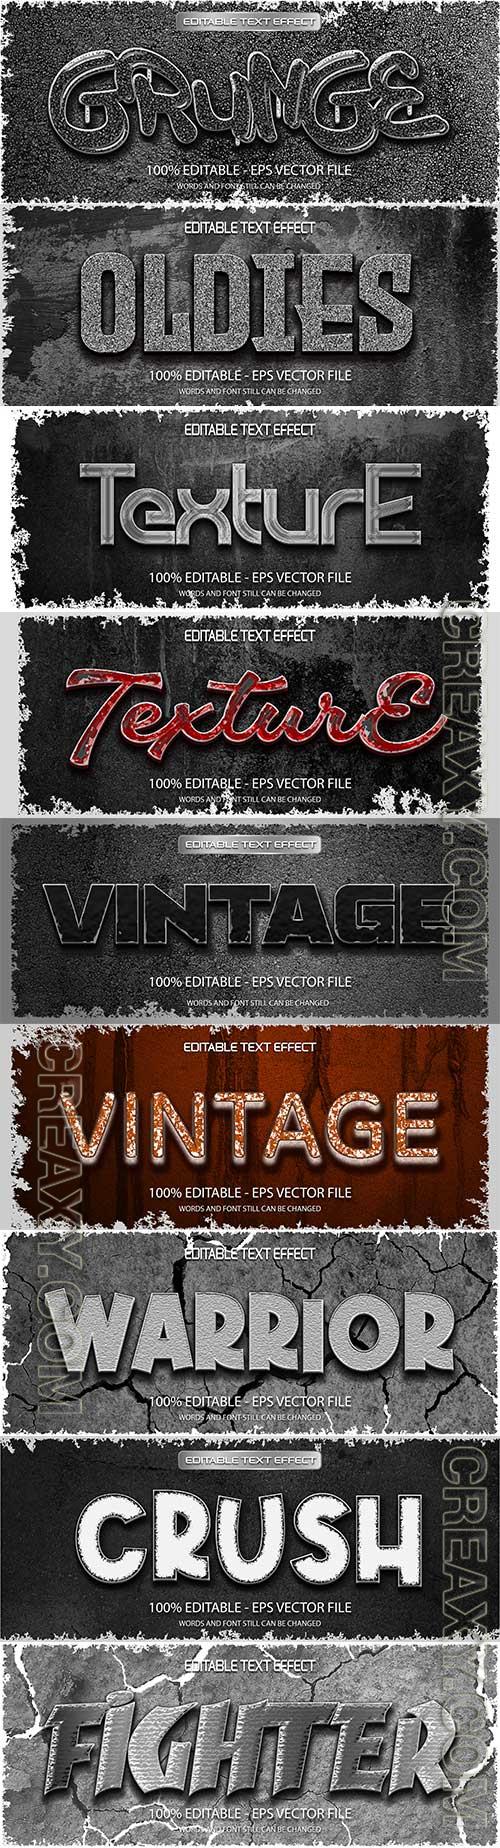 Vintage text effect vector background